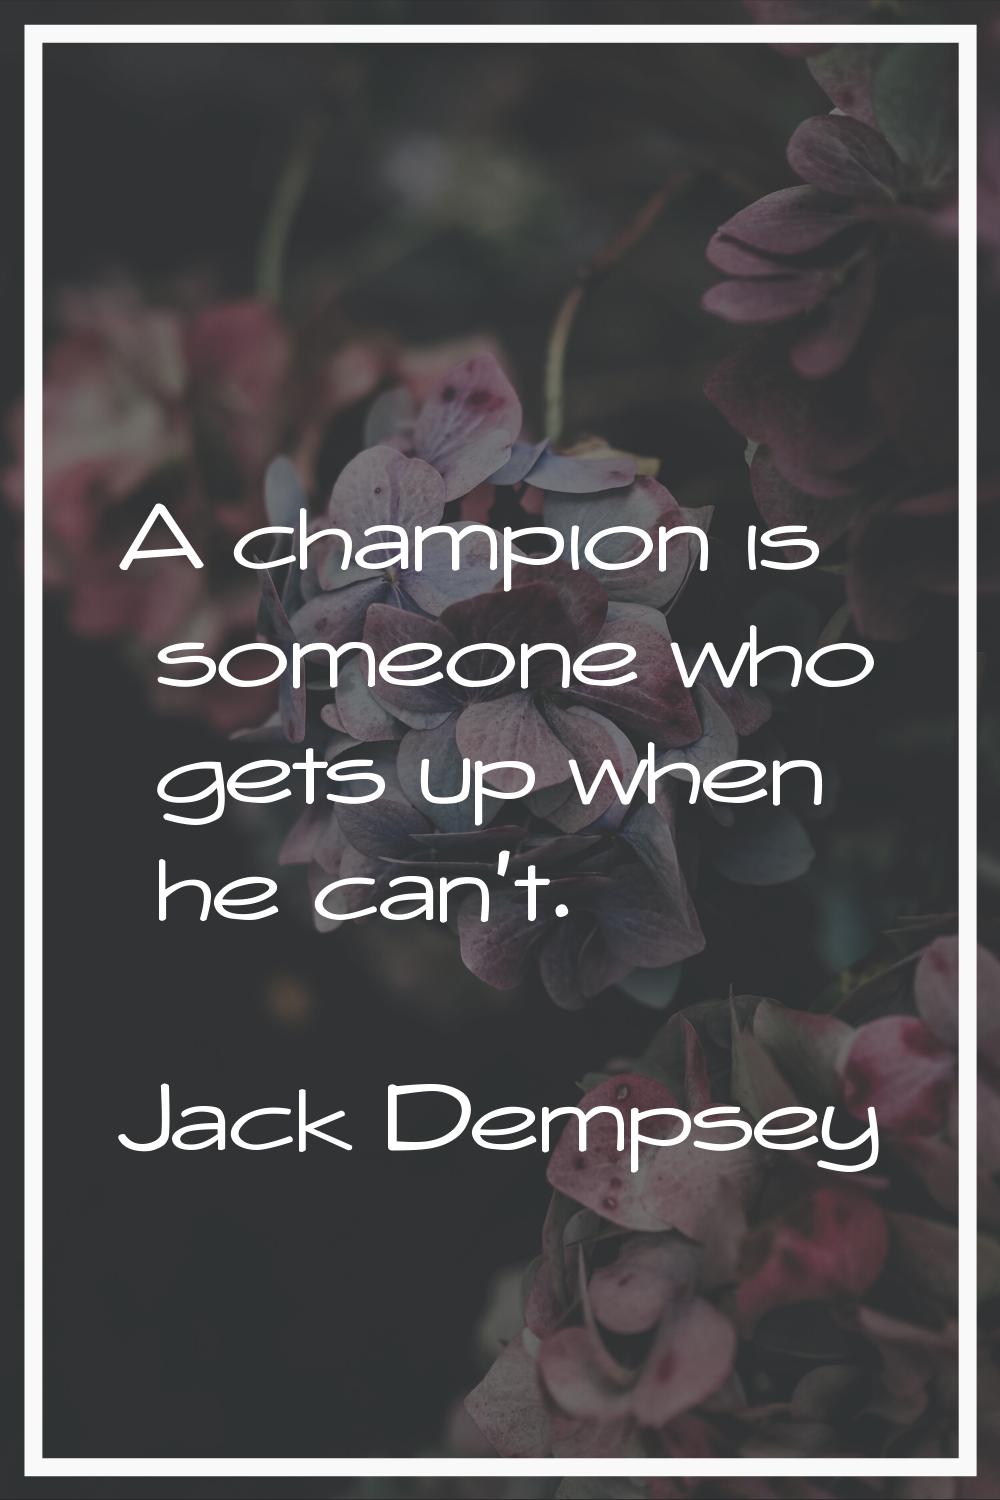 A champion is someone who gets up when he can't.